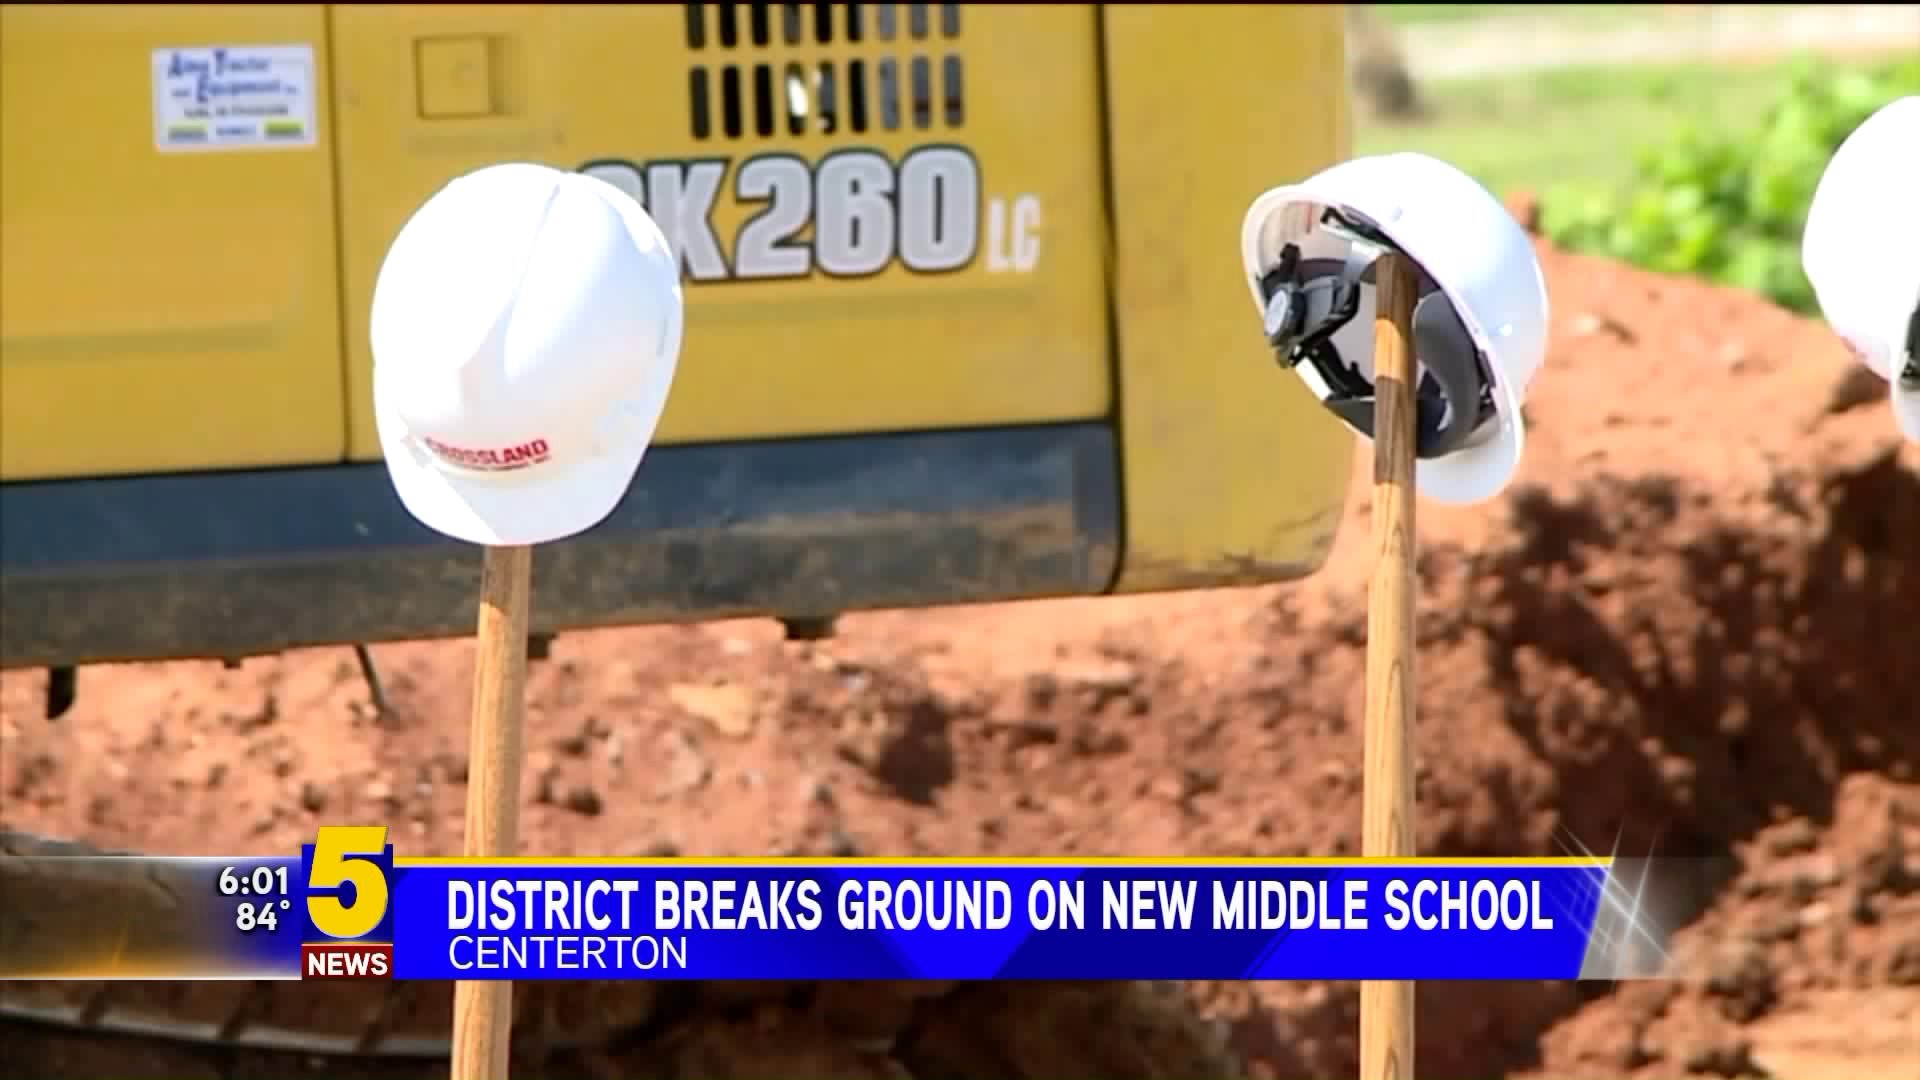 District Breaks Ground on New Middle School